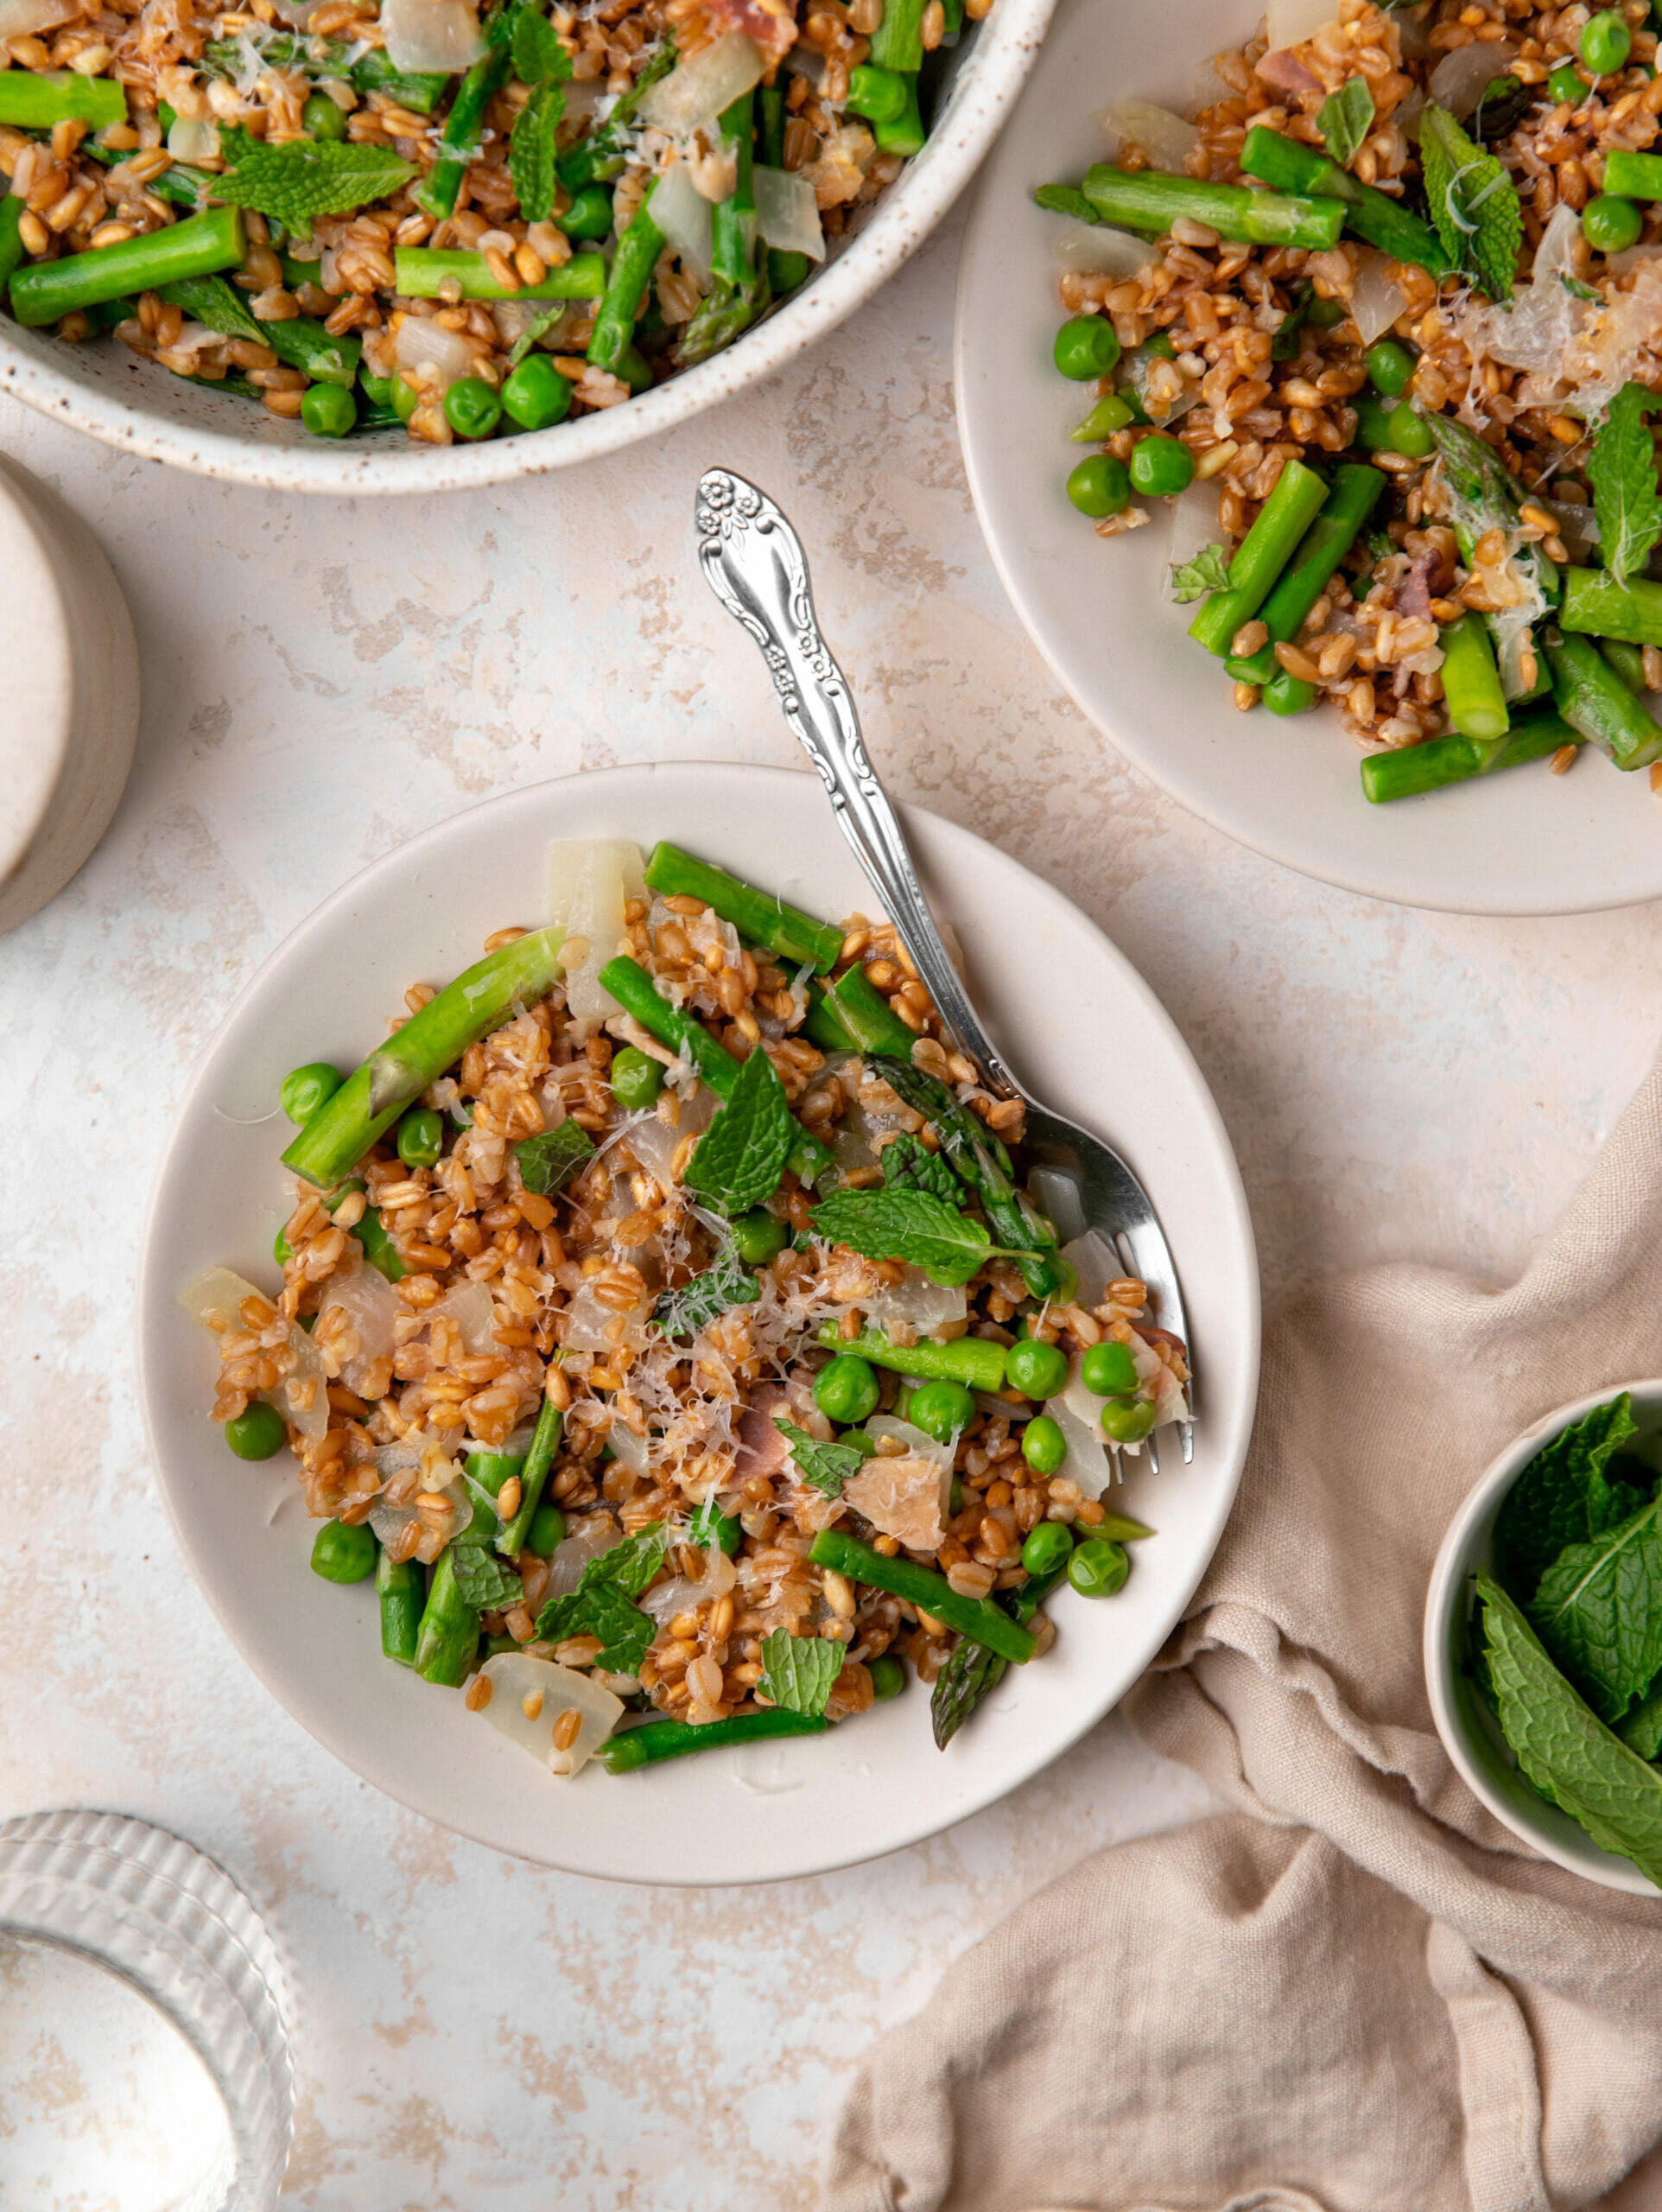 Farro risotto with asparagus and peas